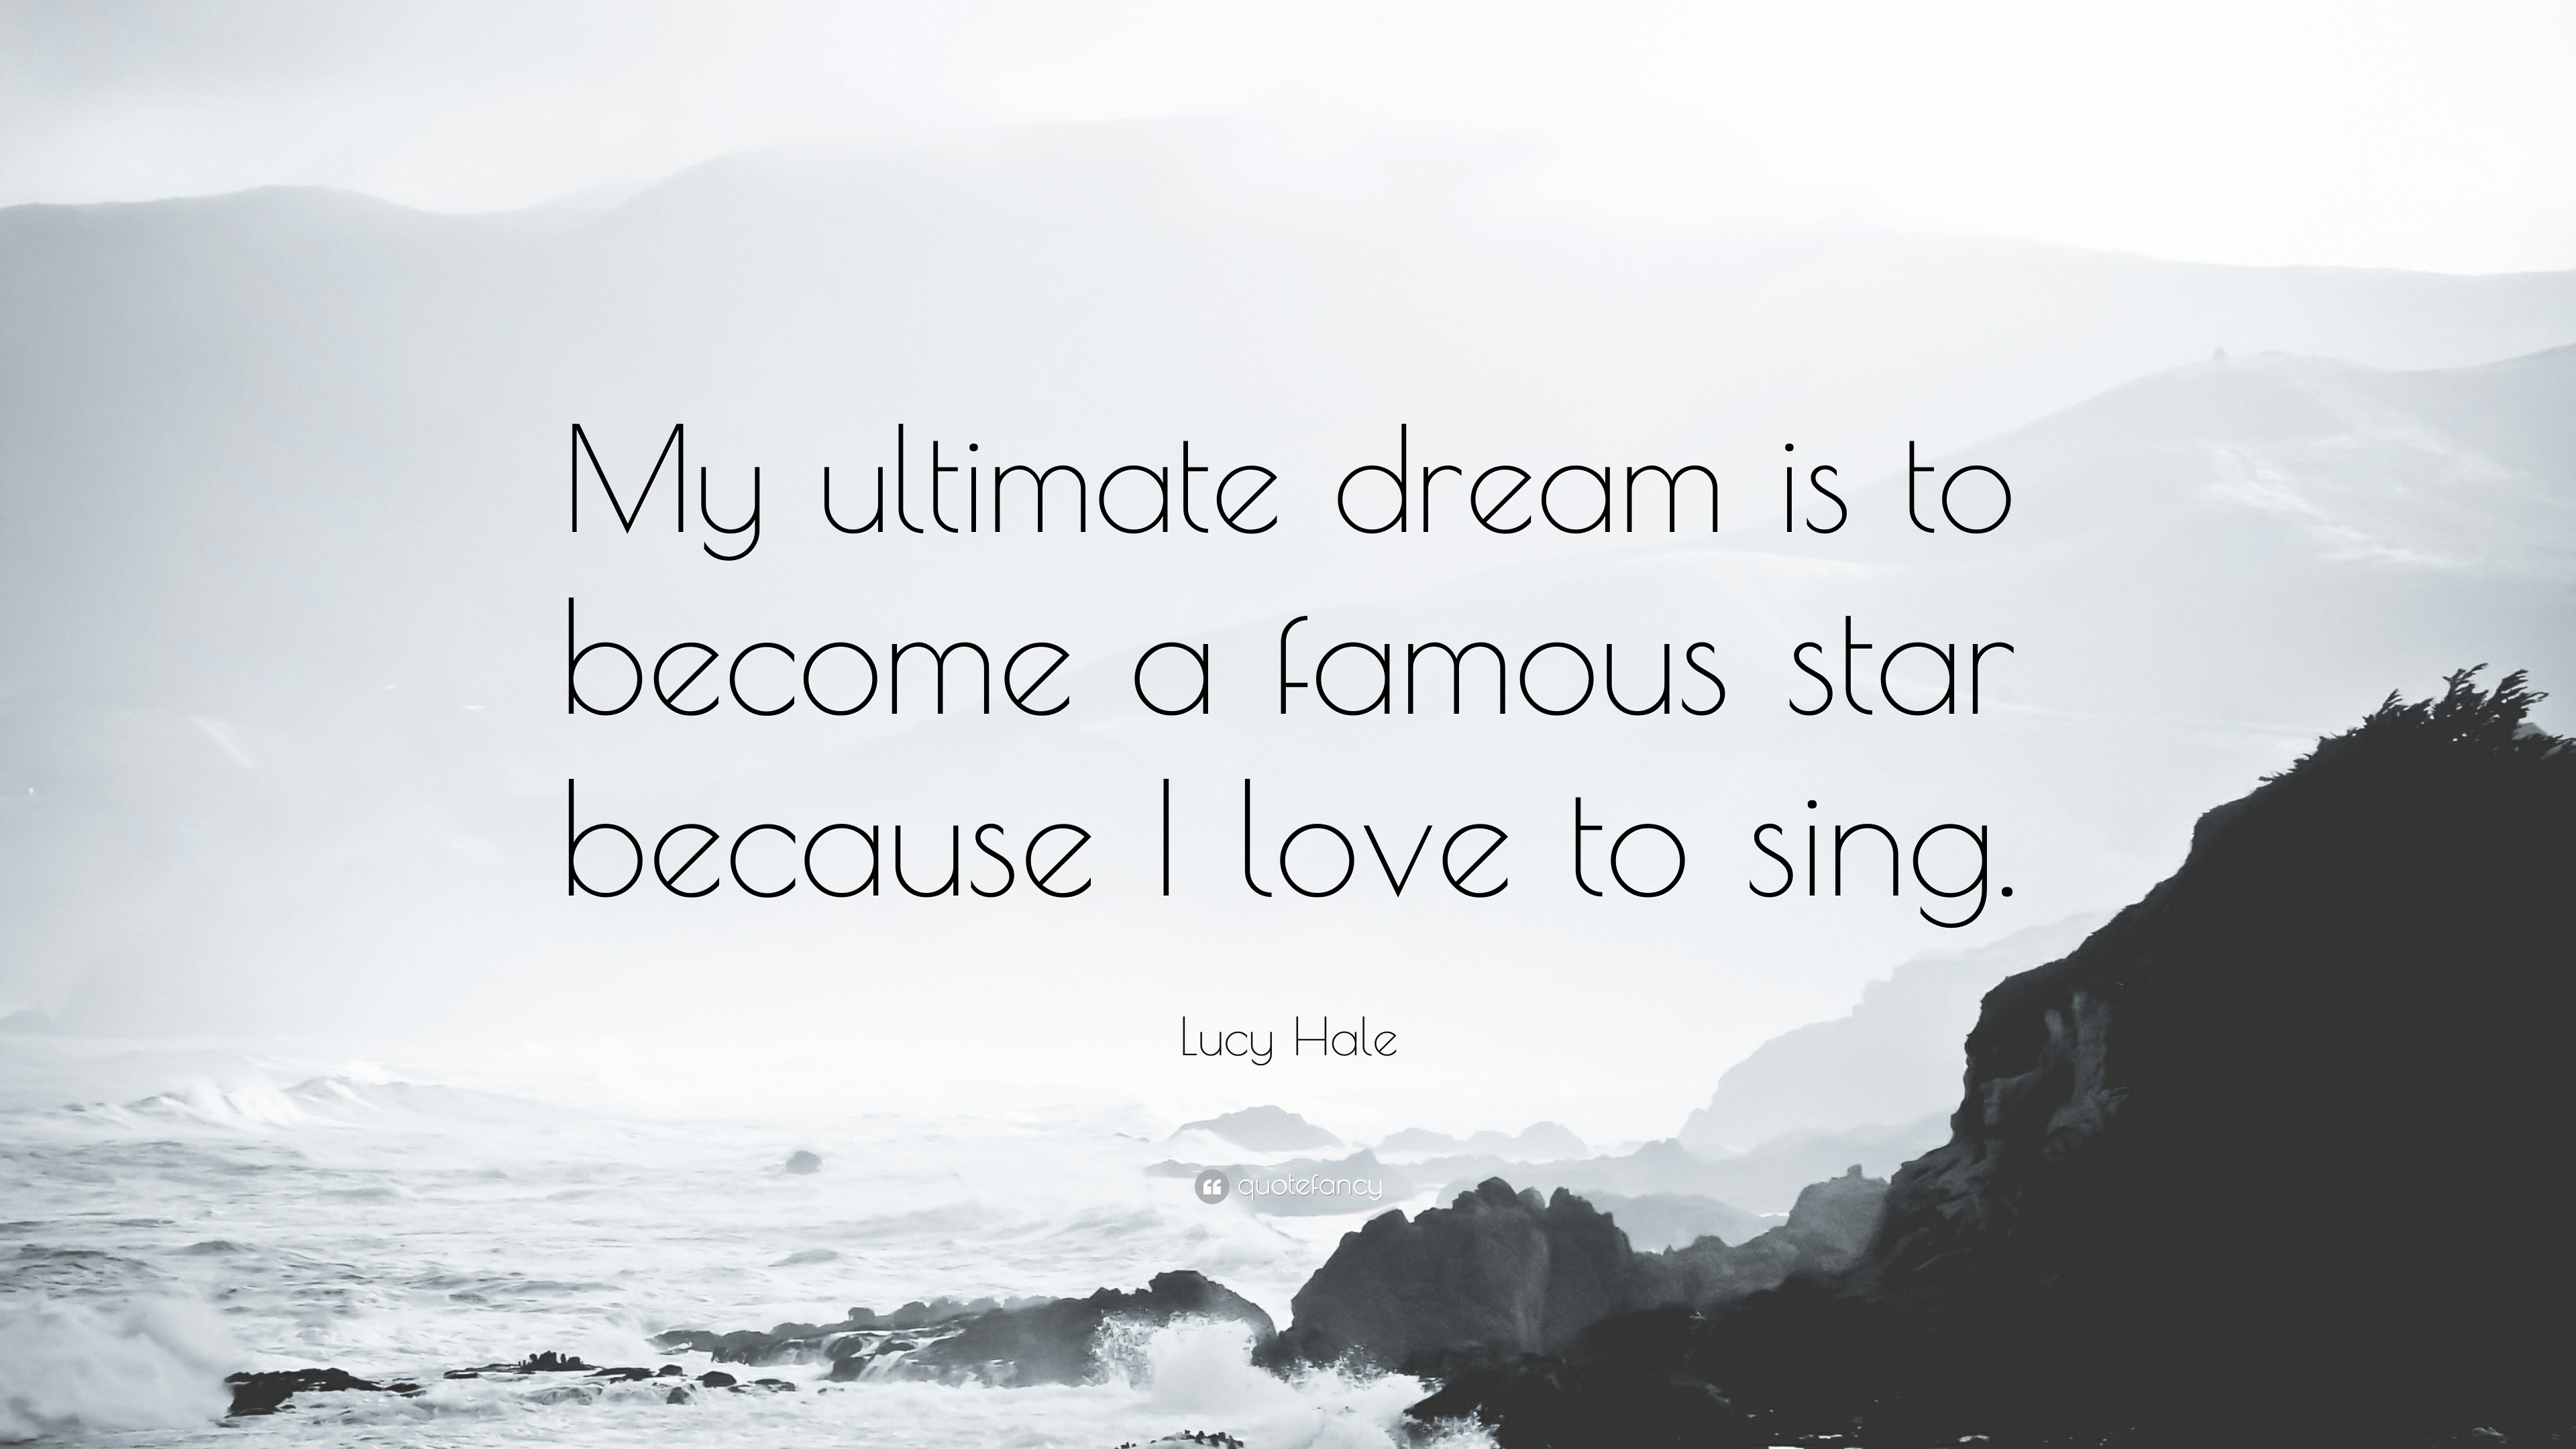 Lucy Hale Quote “My ultimate dream is to be e a famous star because I